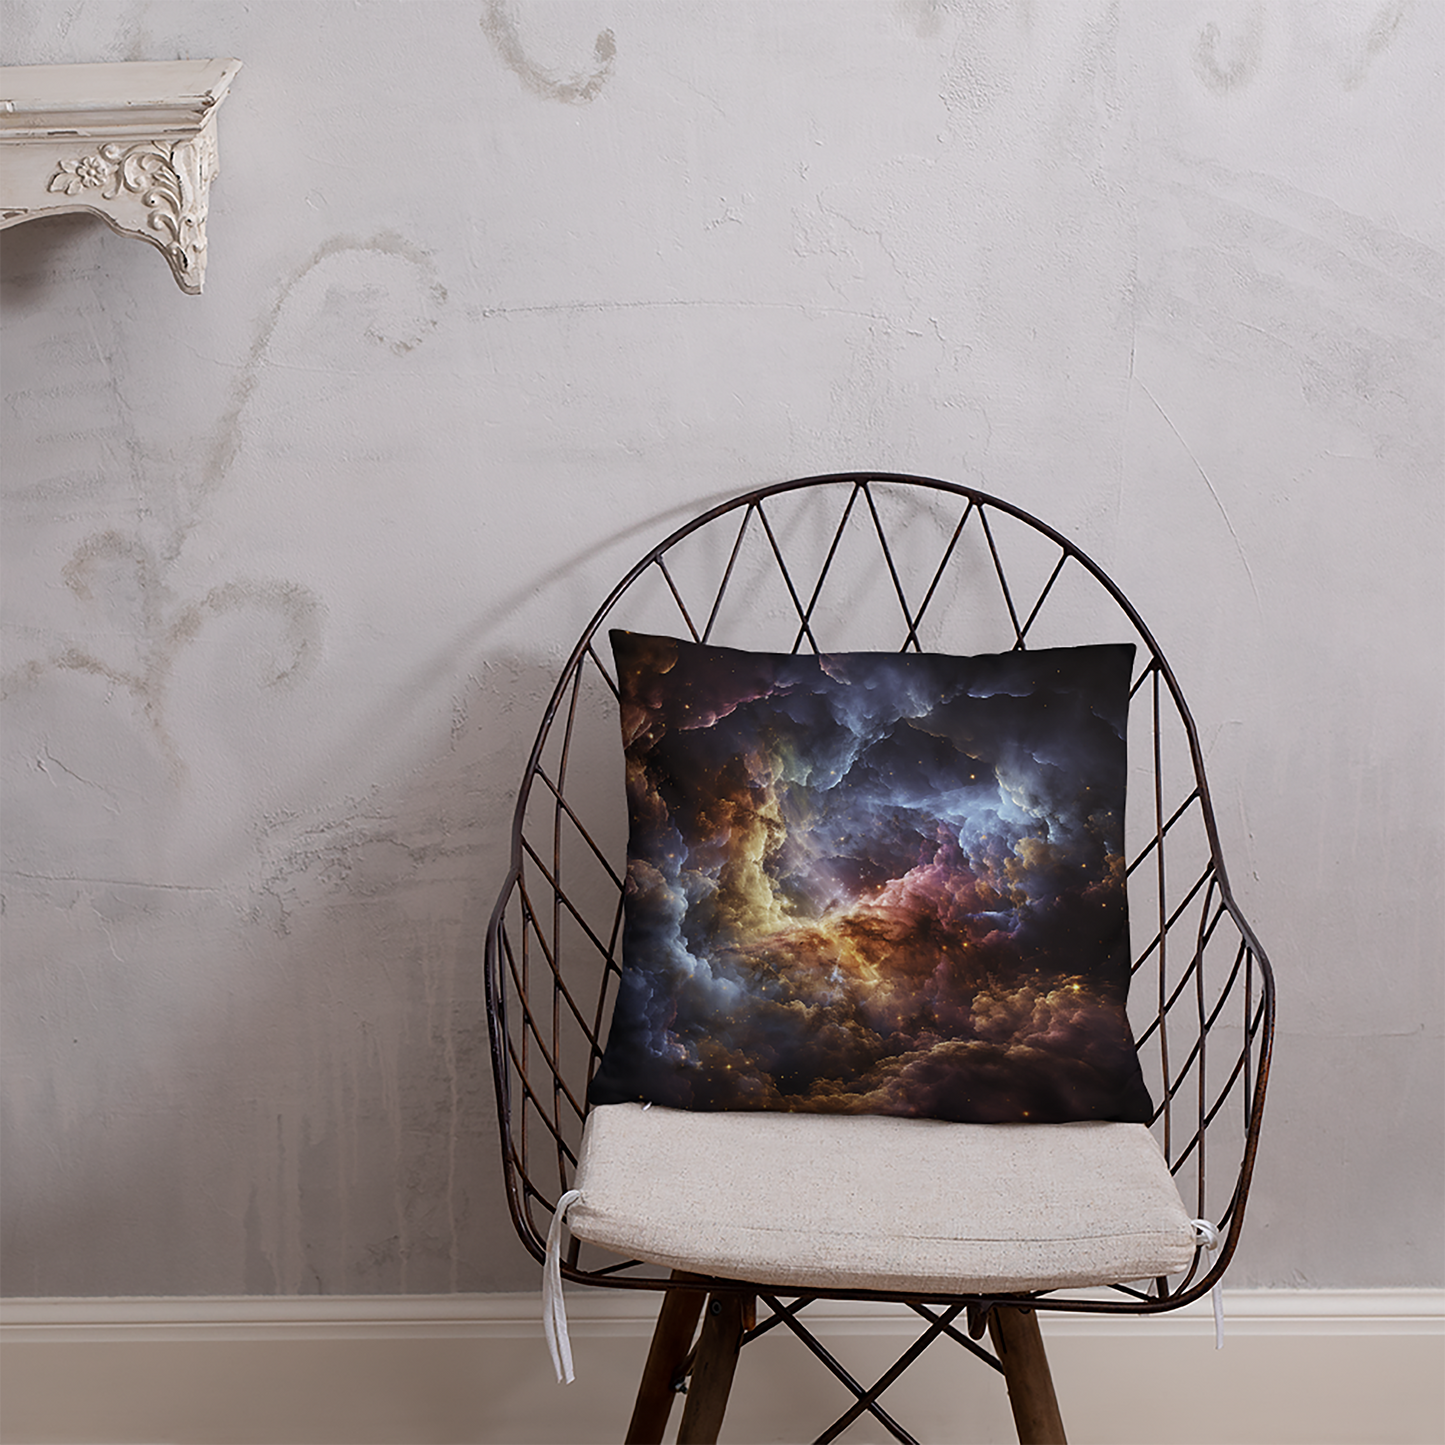 Space Throw Pillow Galactic Dreams Polyester Decorative Cushion 18x18